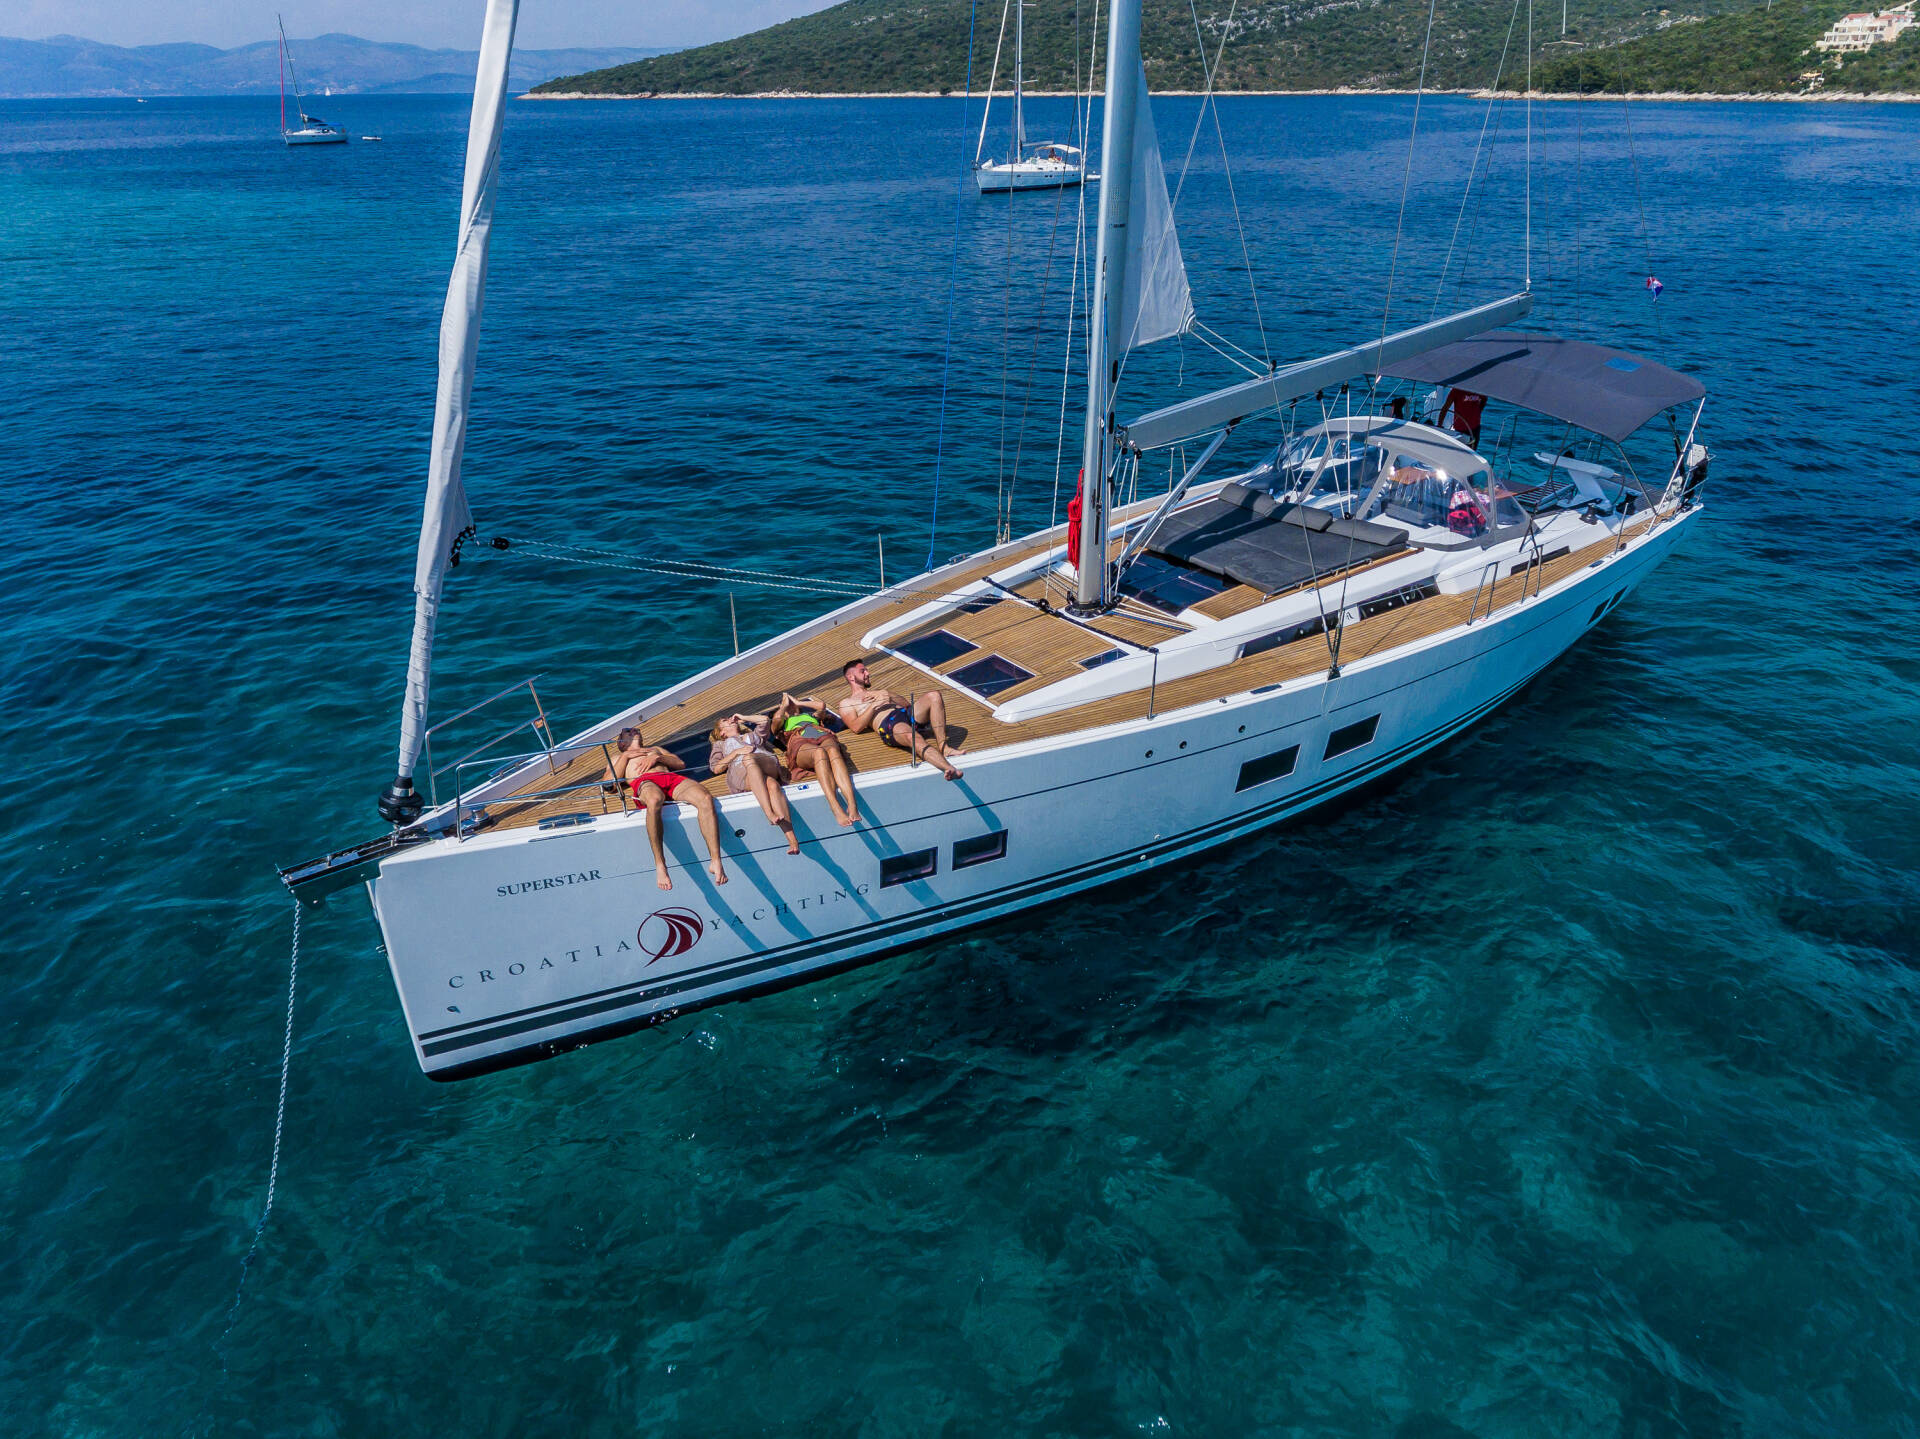 Need help with yacht charter?